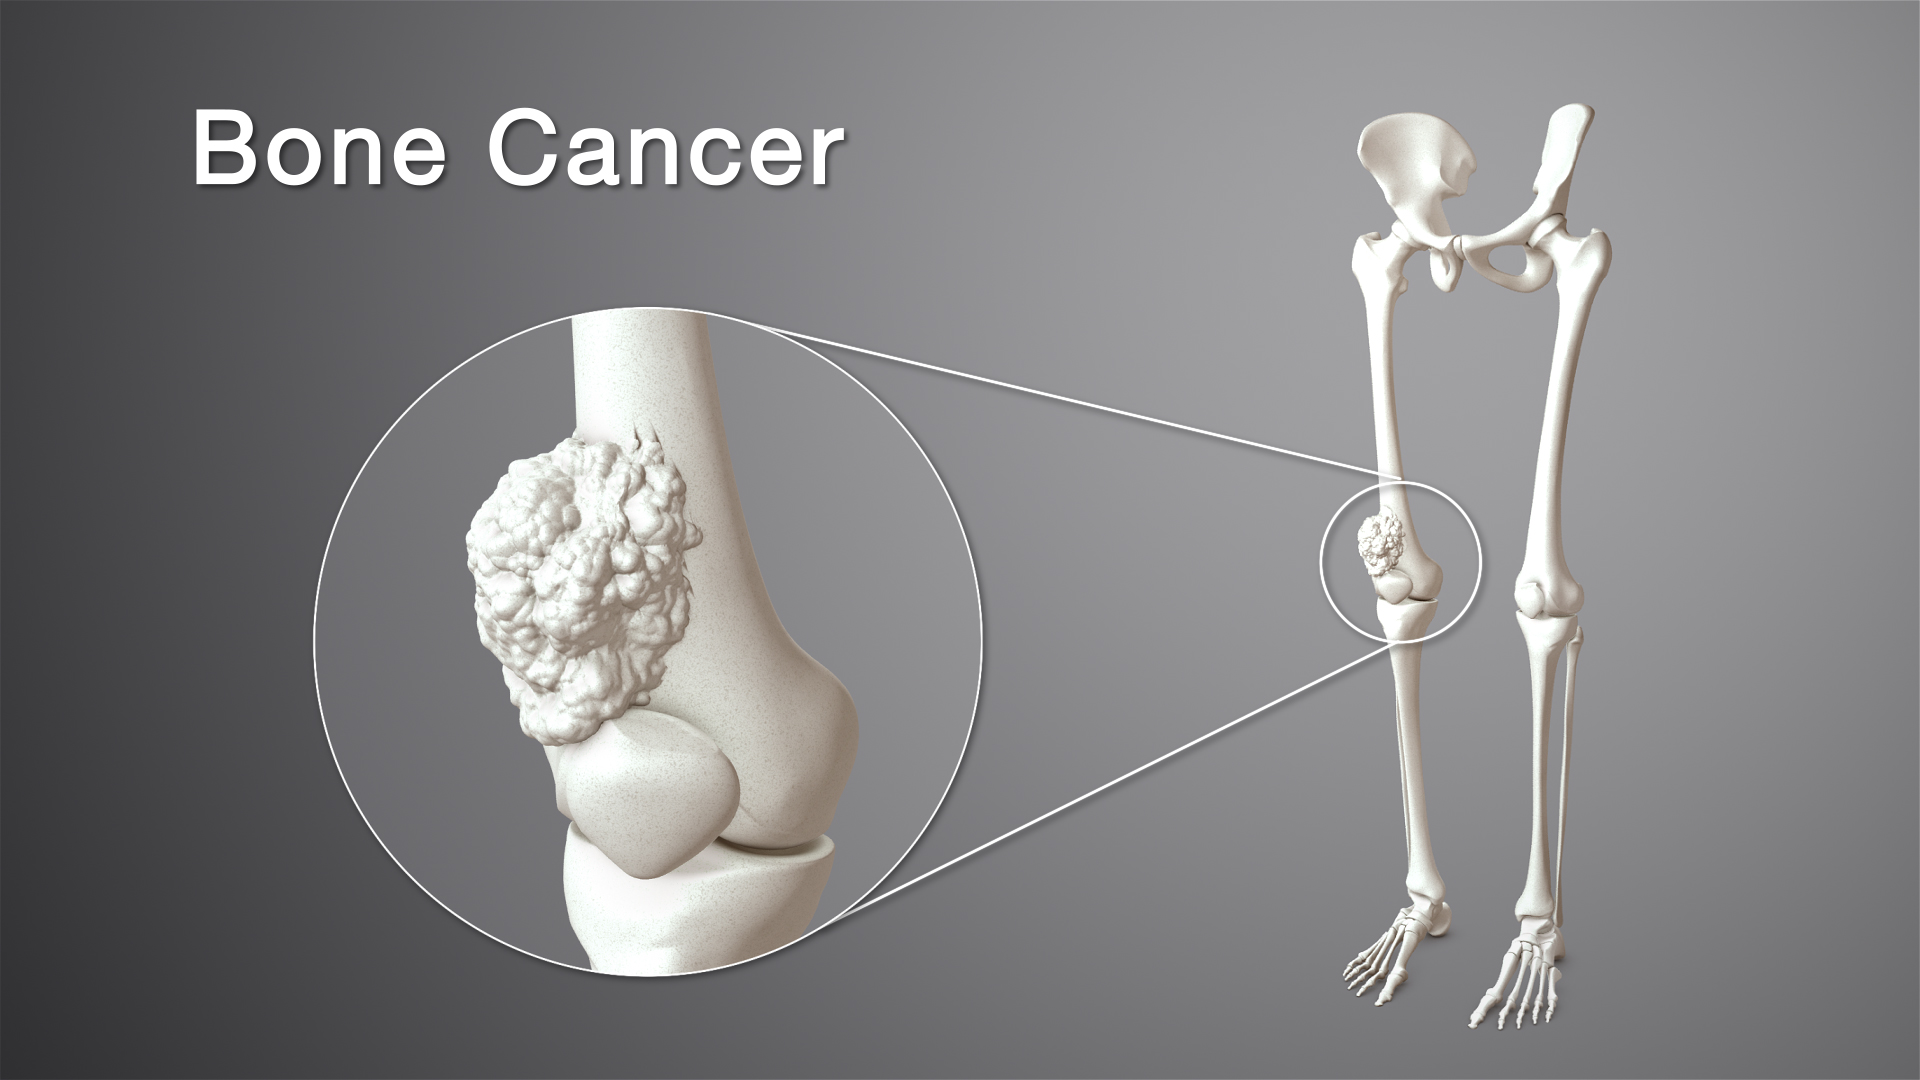 Not all bone tumors are cancerous